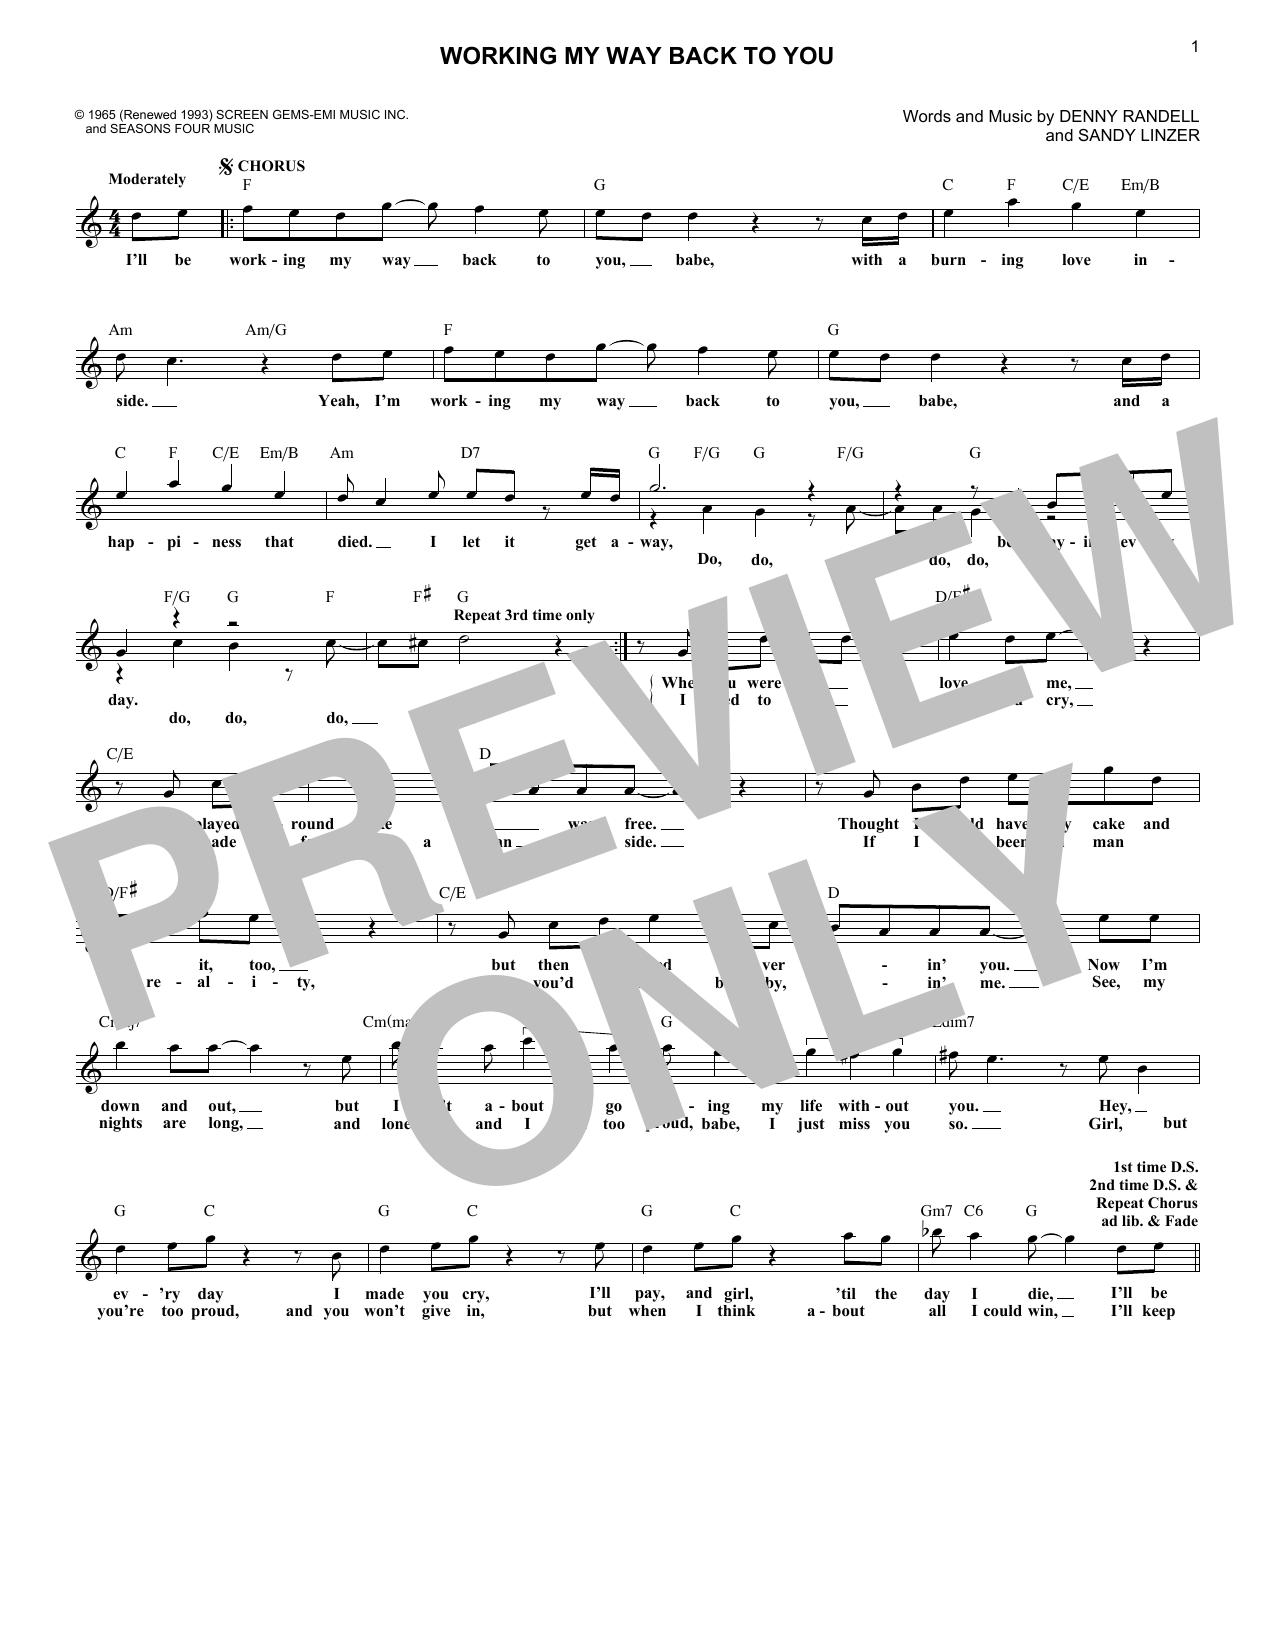 Download The 4 Seasons Working My Way Back To You Sheet Music